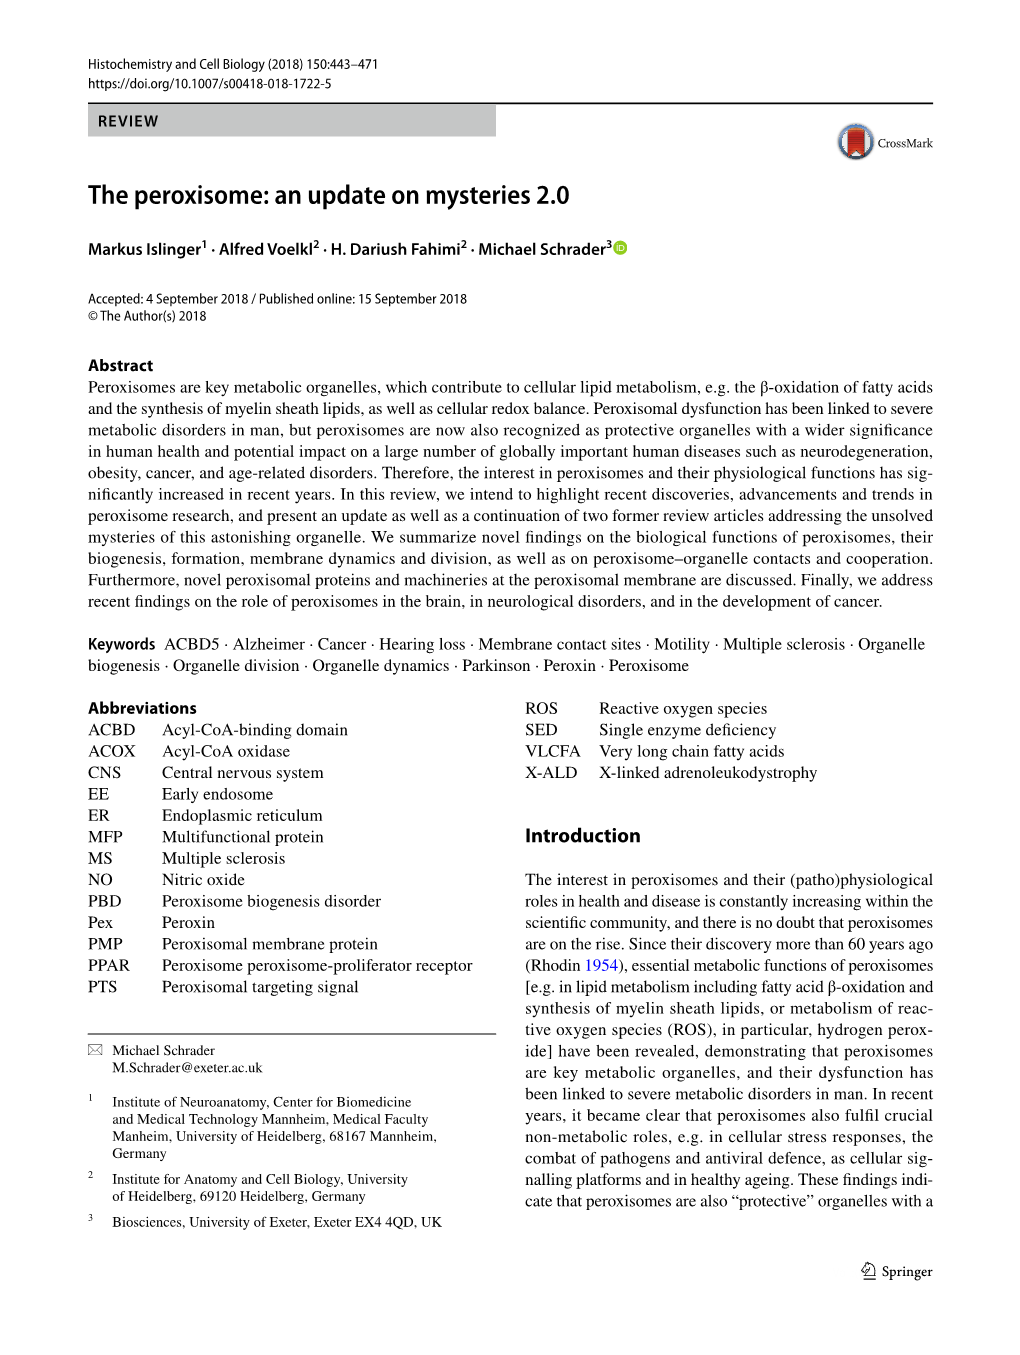 The Peroxisome: an Update on Mysteries 2.0